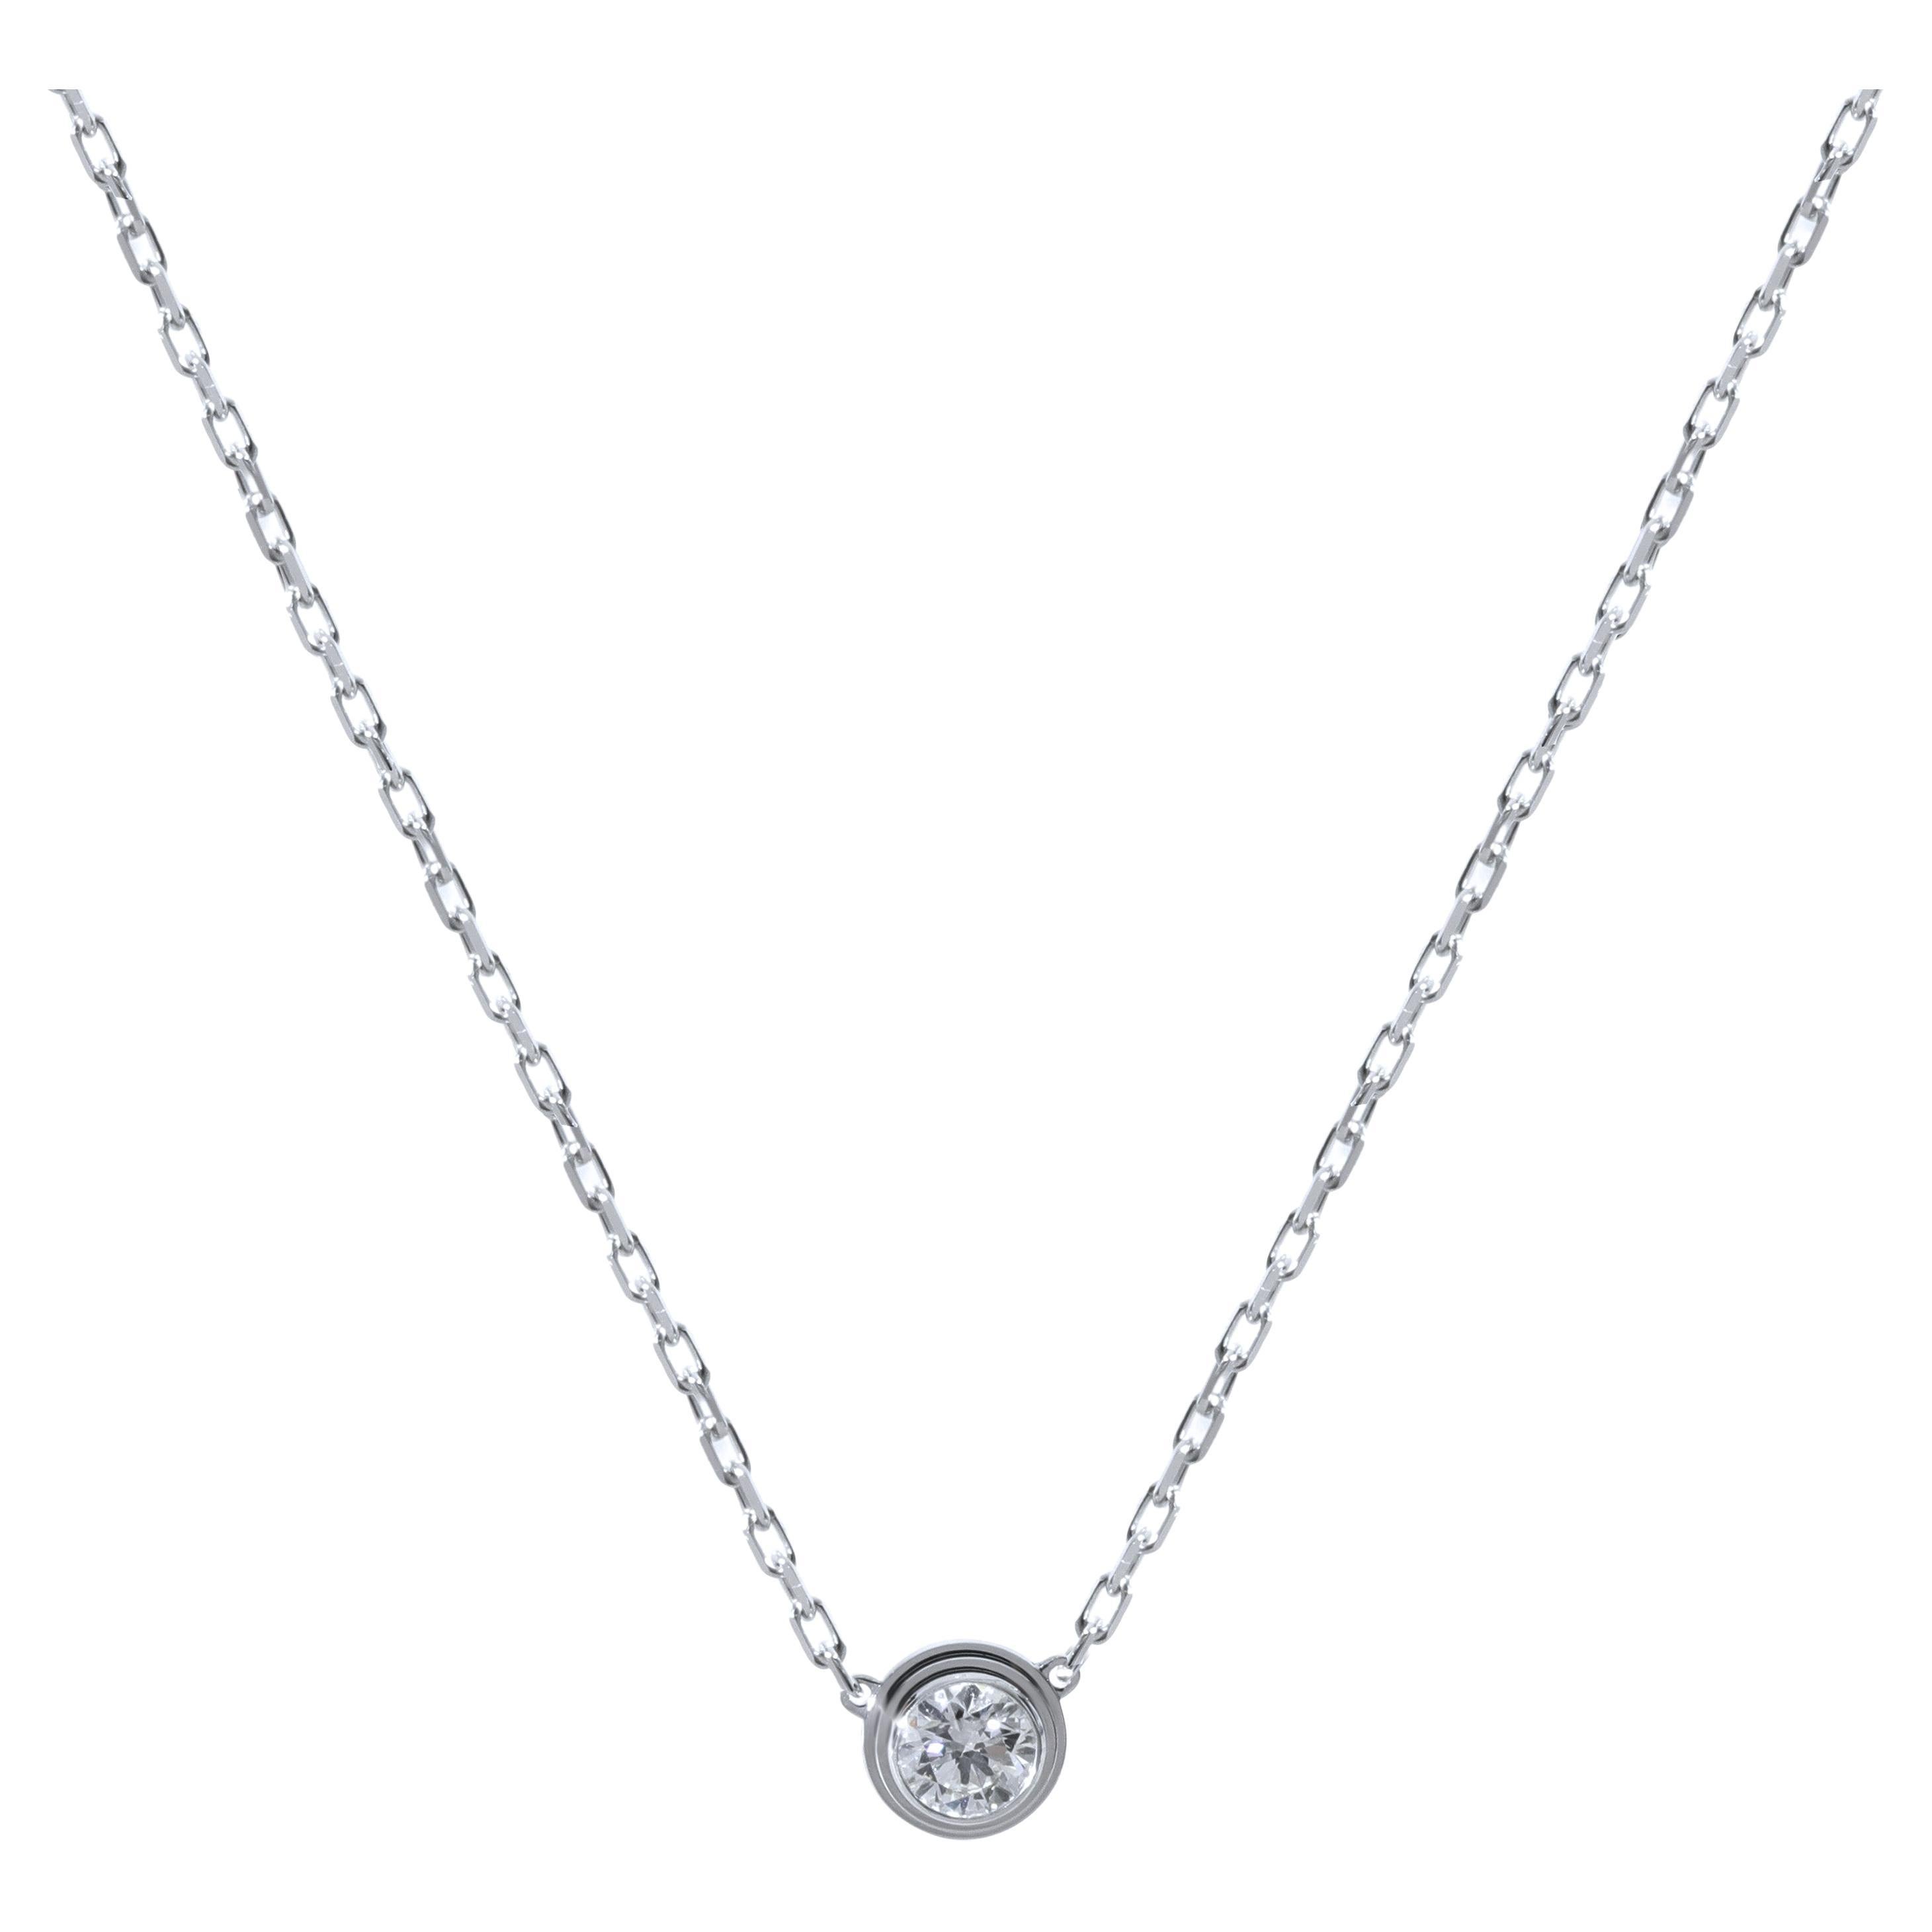 Cartier D Amour Diamond Solitaire Necklace in 18k White Gold 0.18 CTW